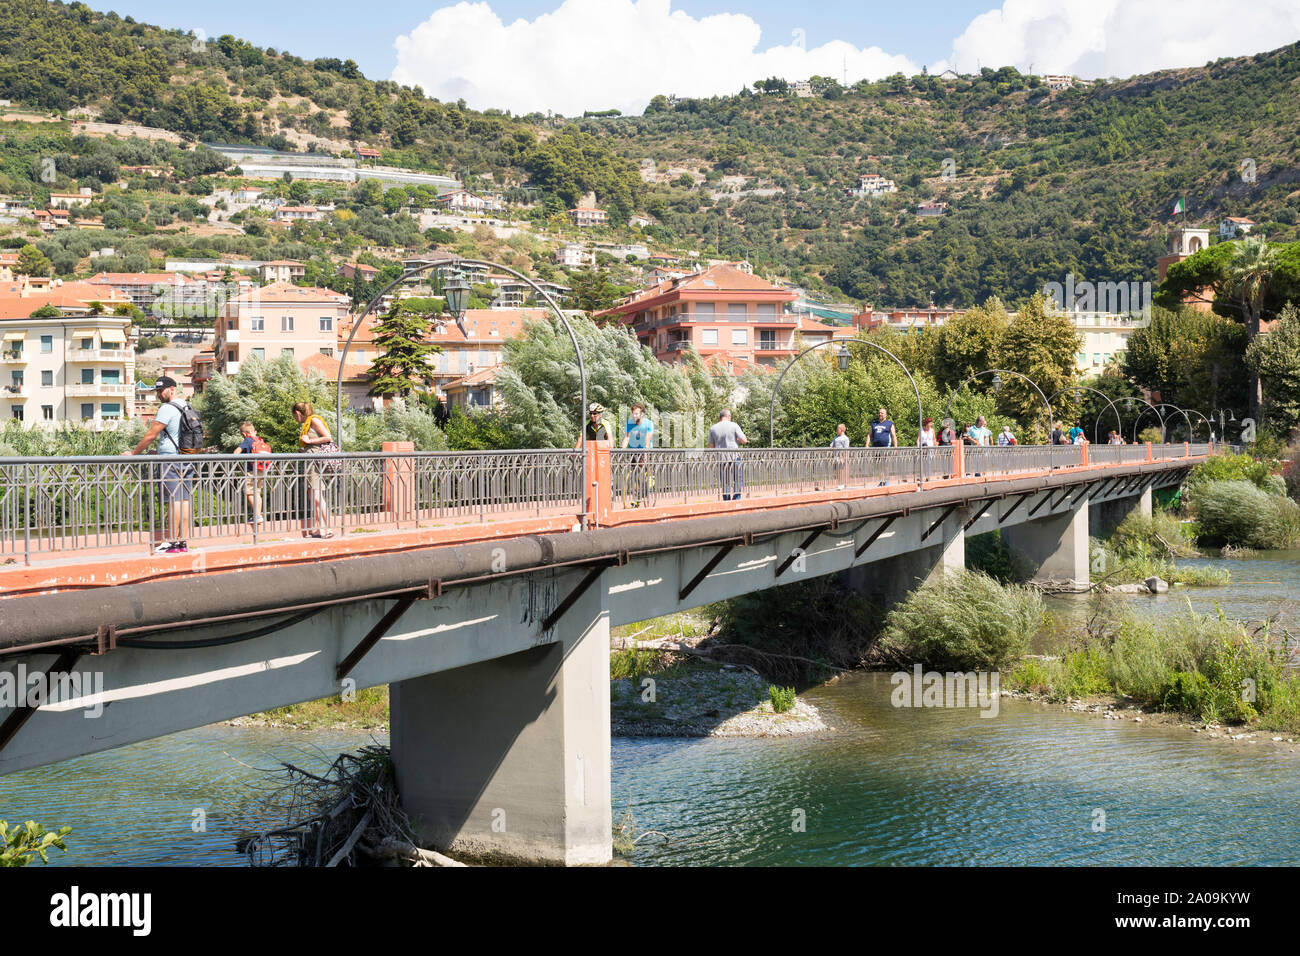 People walking and cycling over the Passerella Squarciafichi footbridge spanning the river Roia in Ventimiglia, Liguria, Italy, Europe Stock Photo